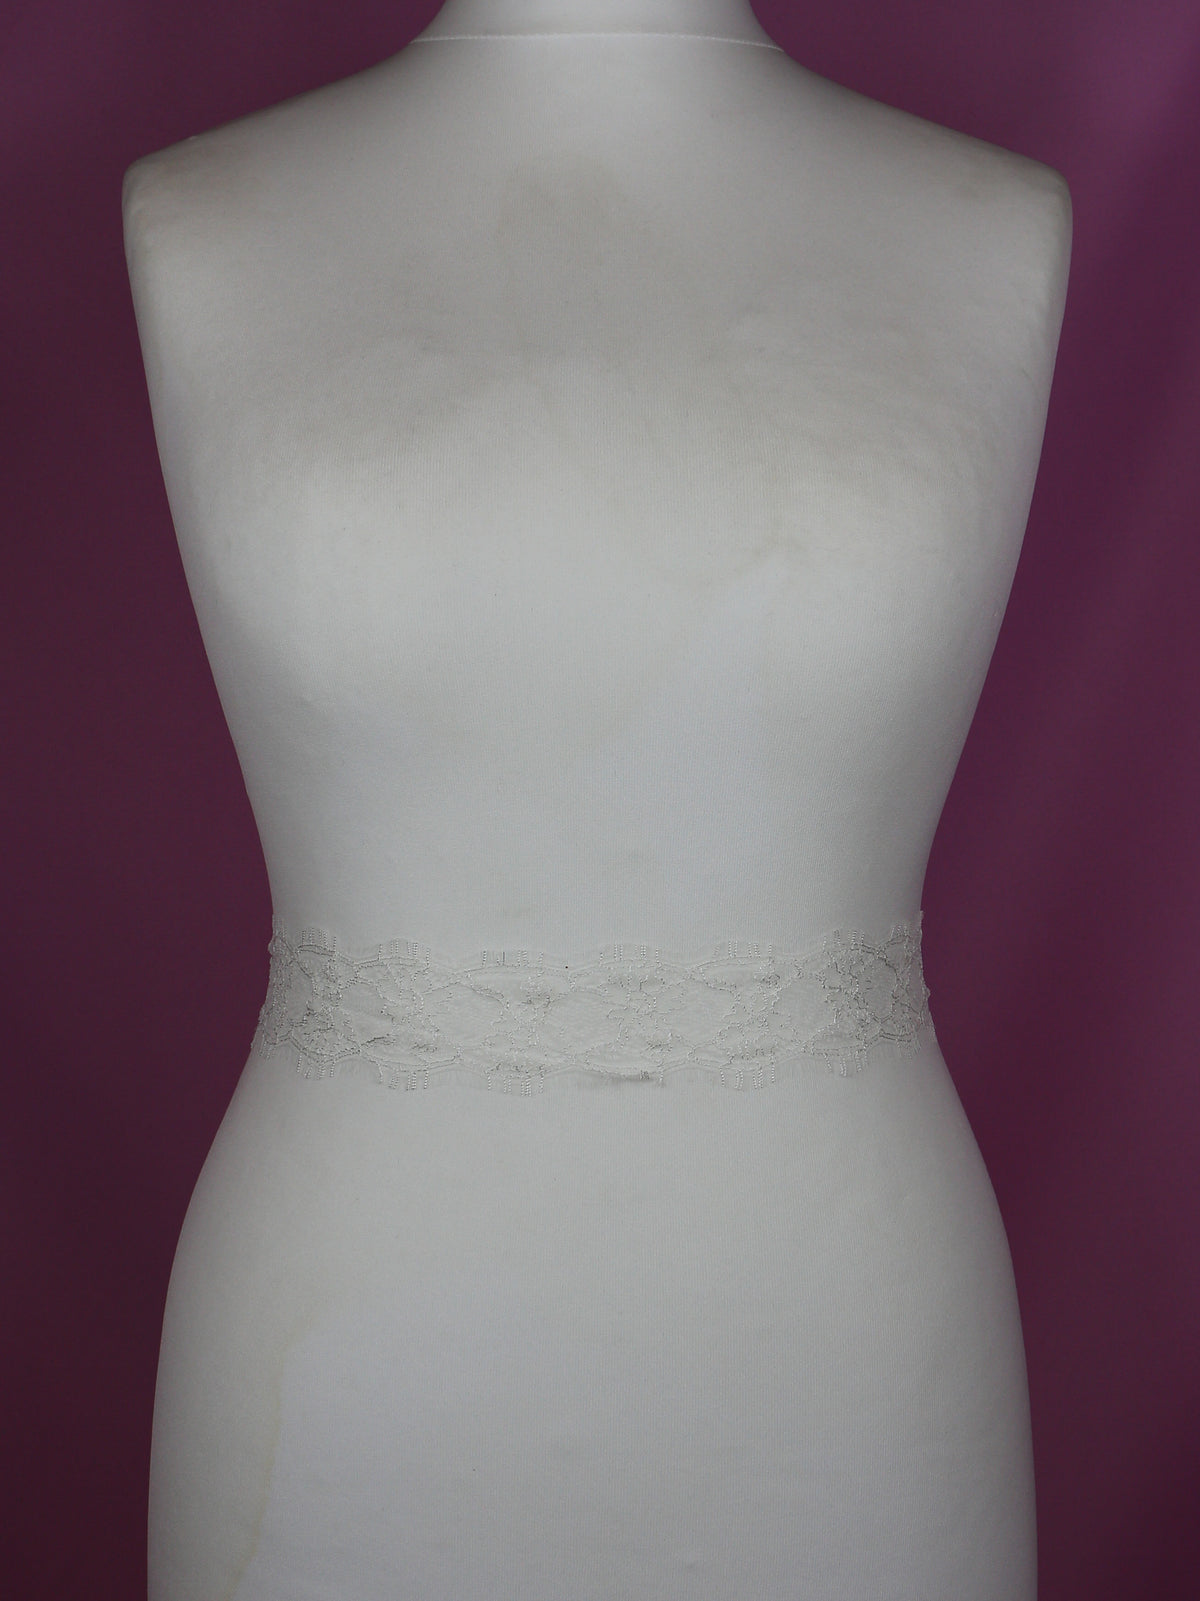 Ivory Chantilly Lace Trim - Yvette